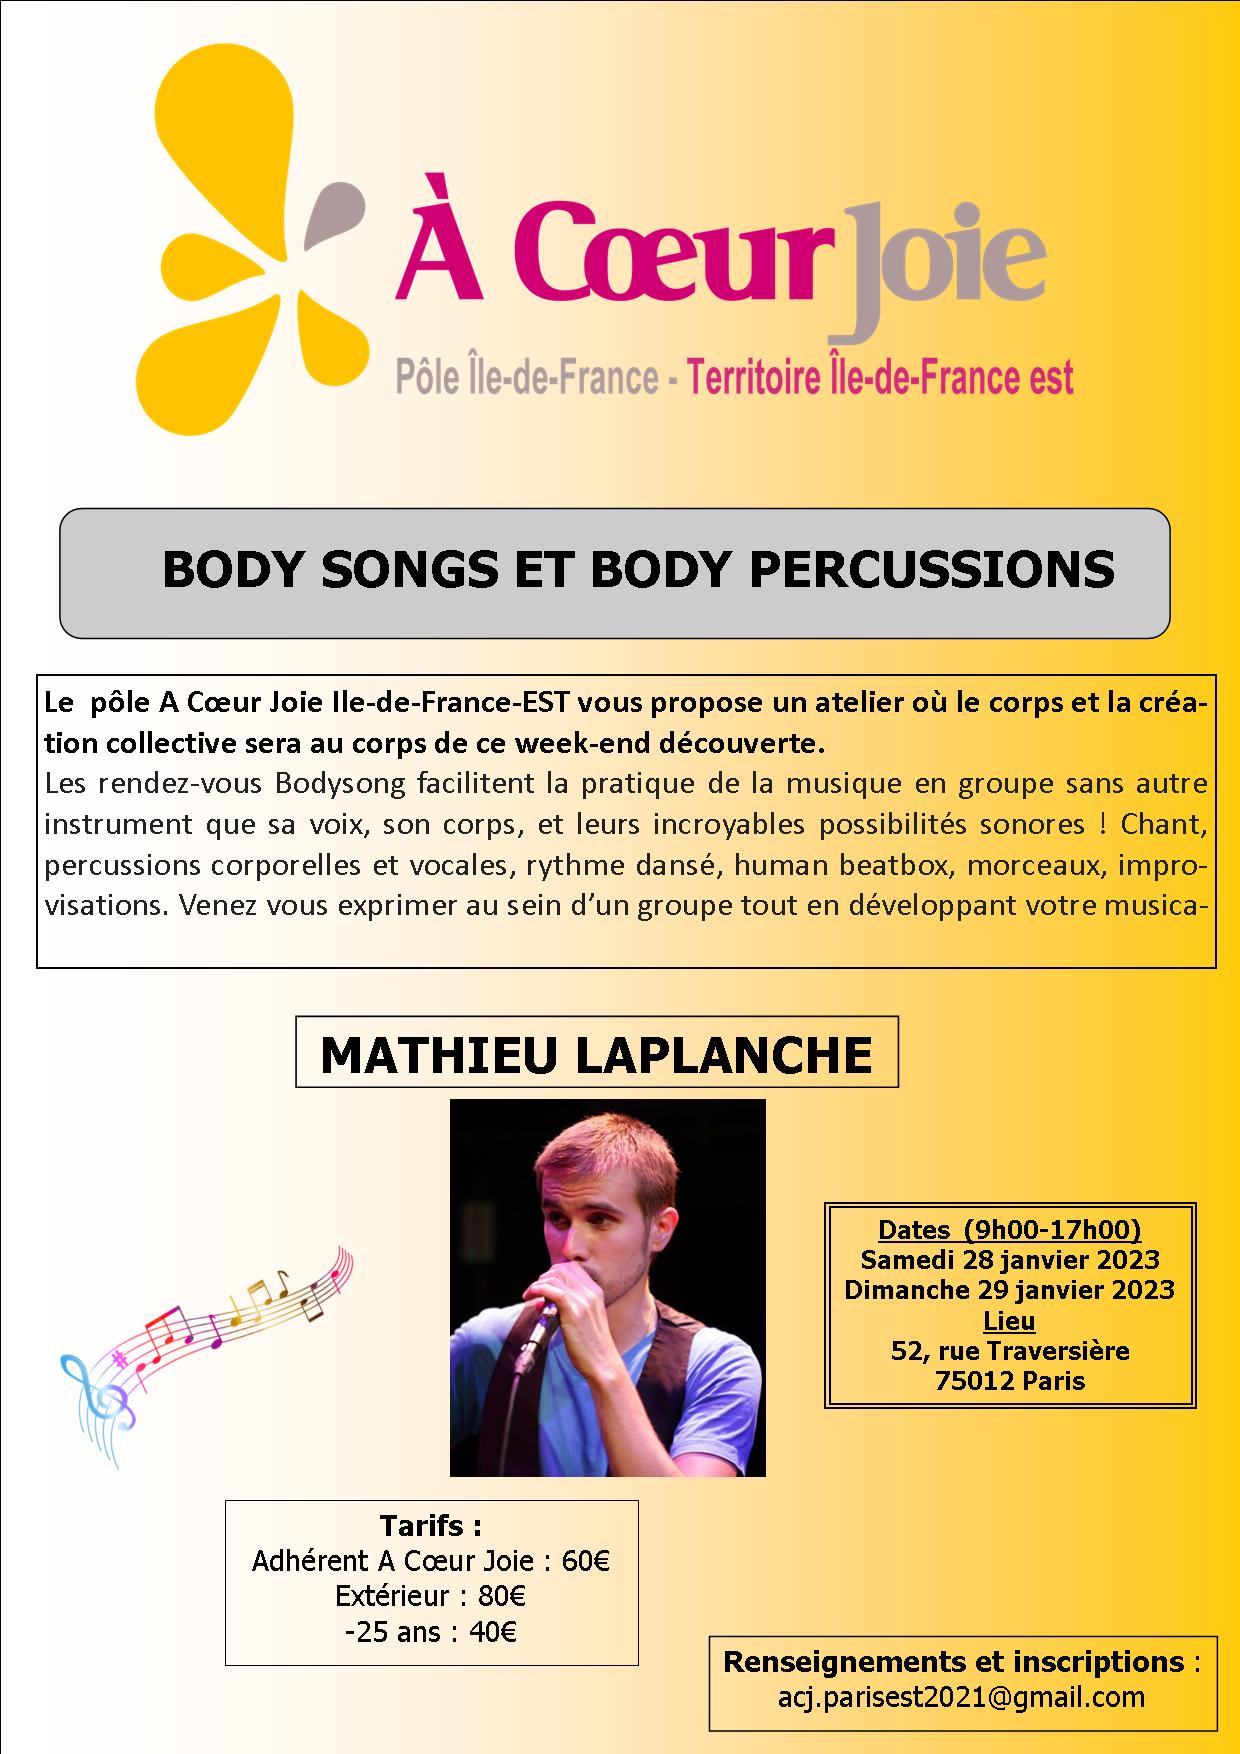 Body songs et body percussions